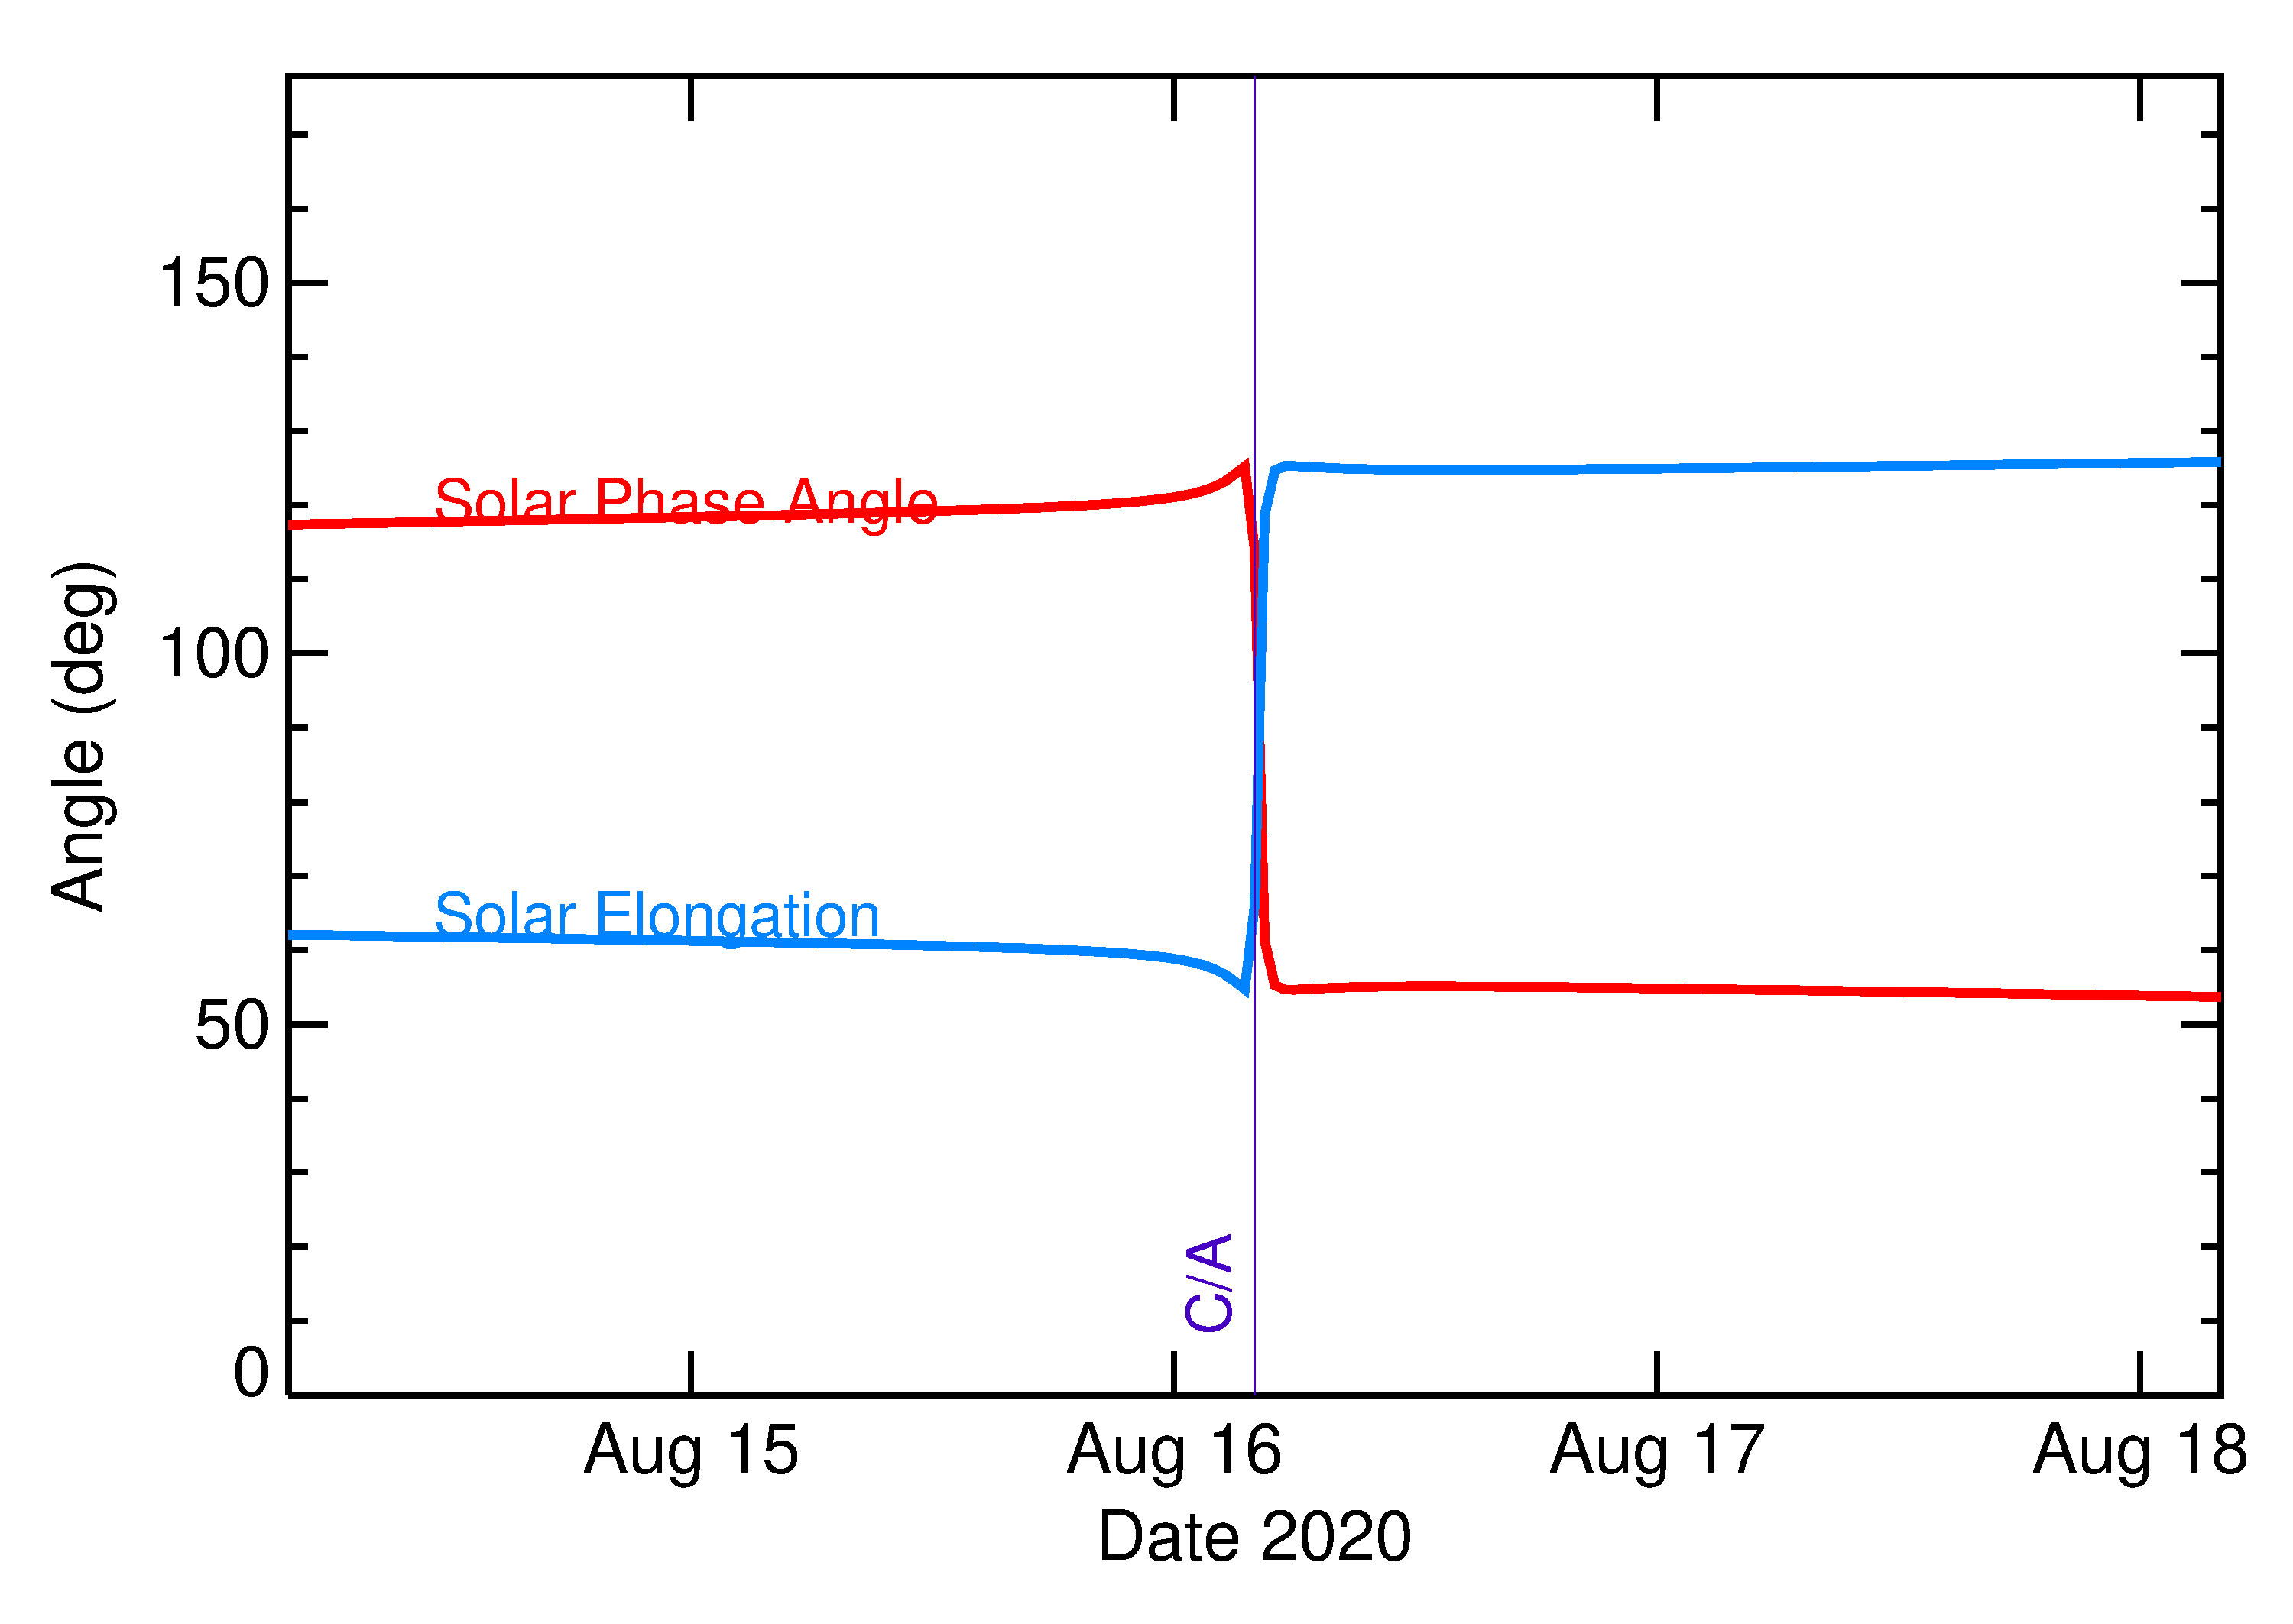 Solar Elongation and Solar Phase Angle of 2020 QG in the days around closest approach